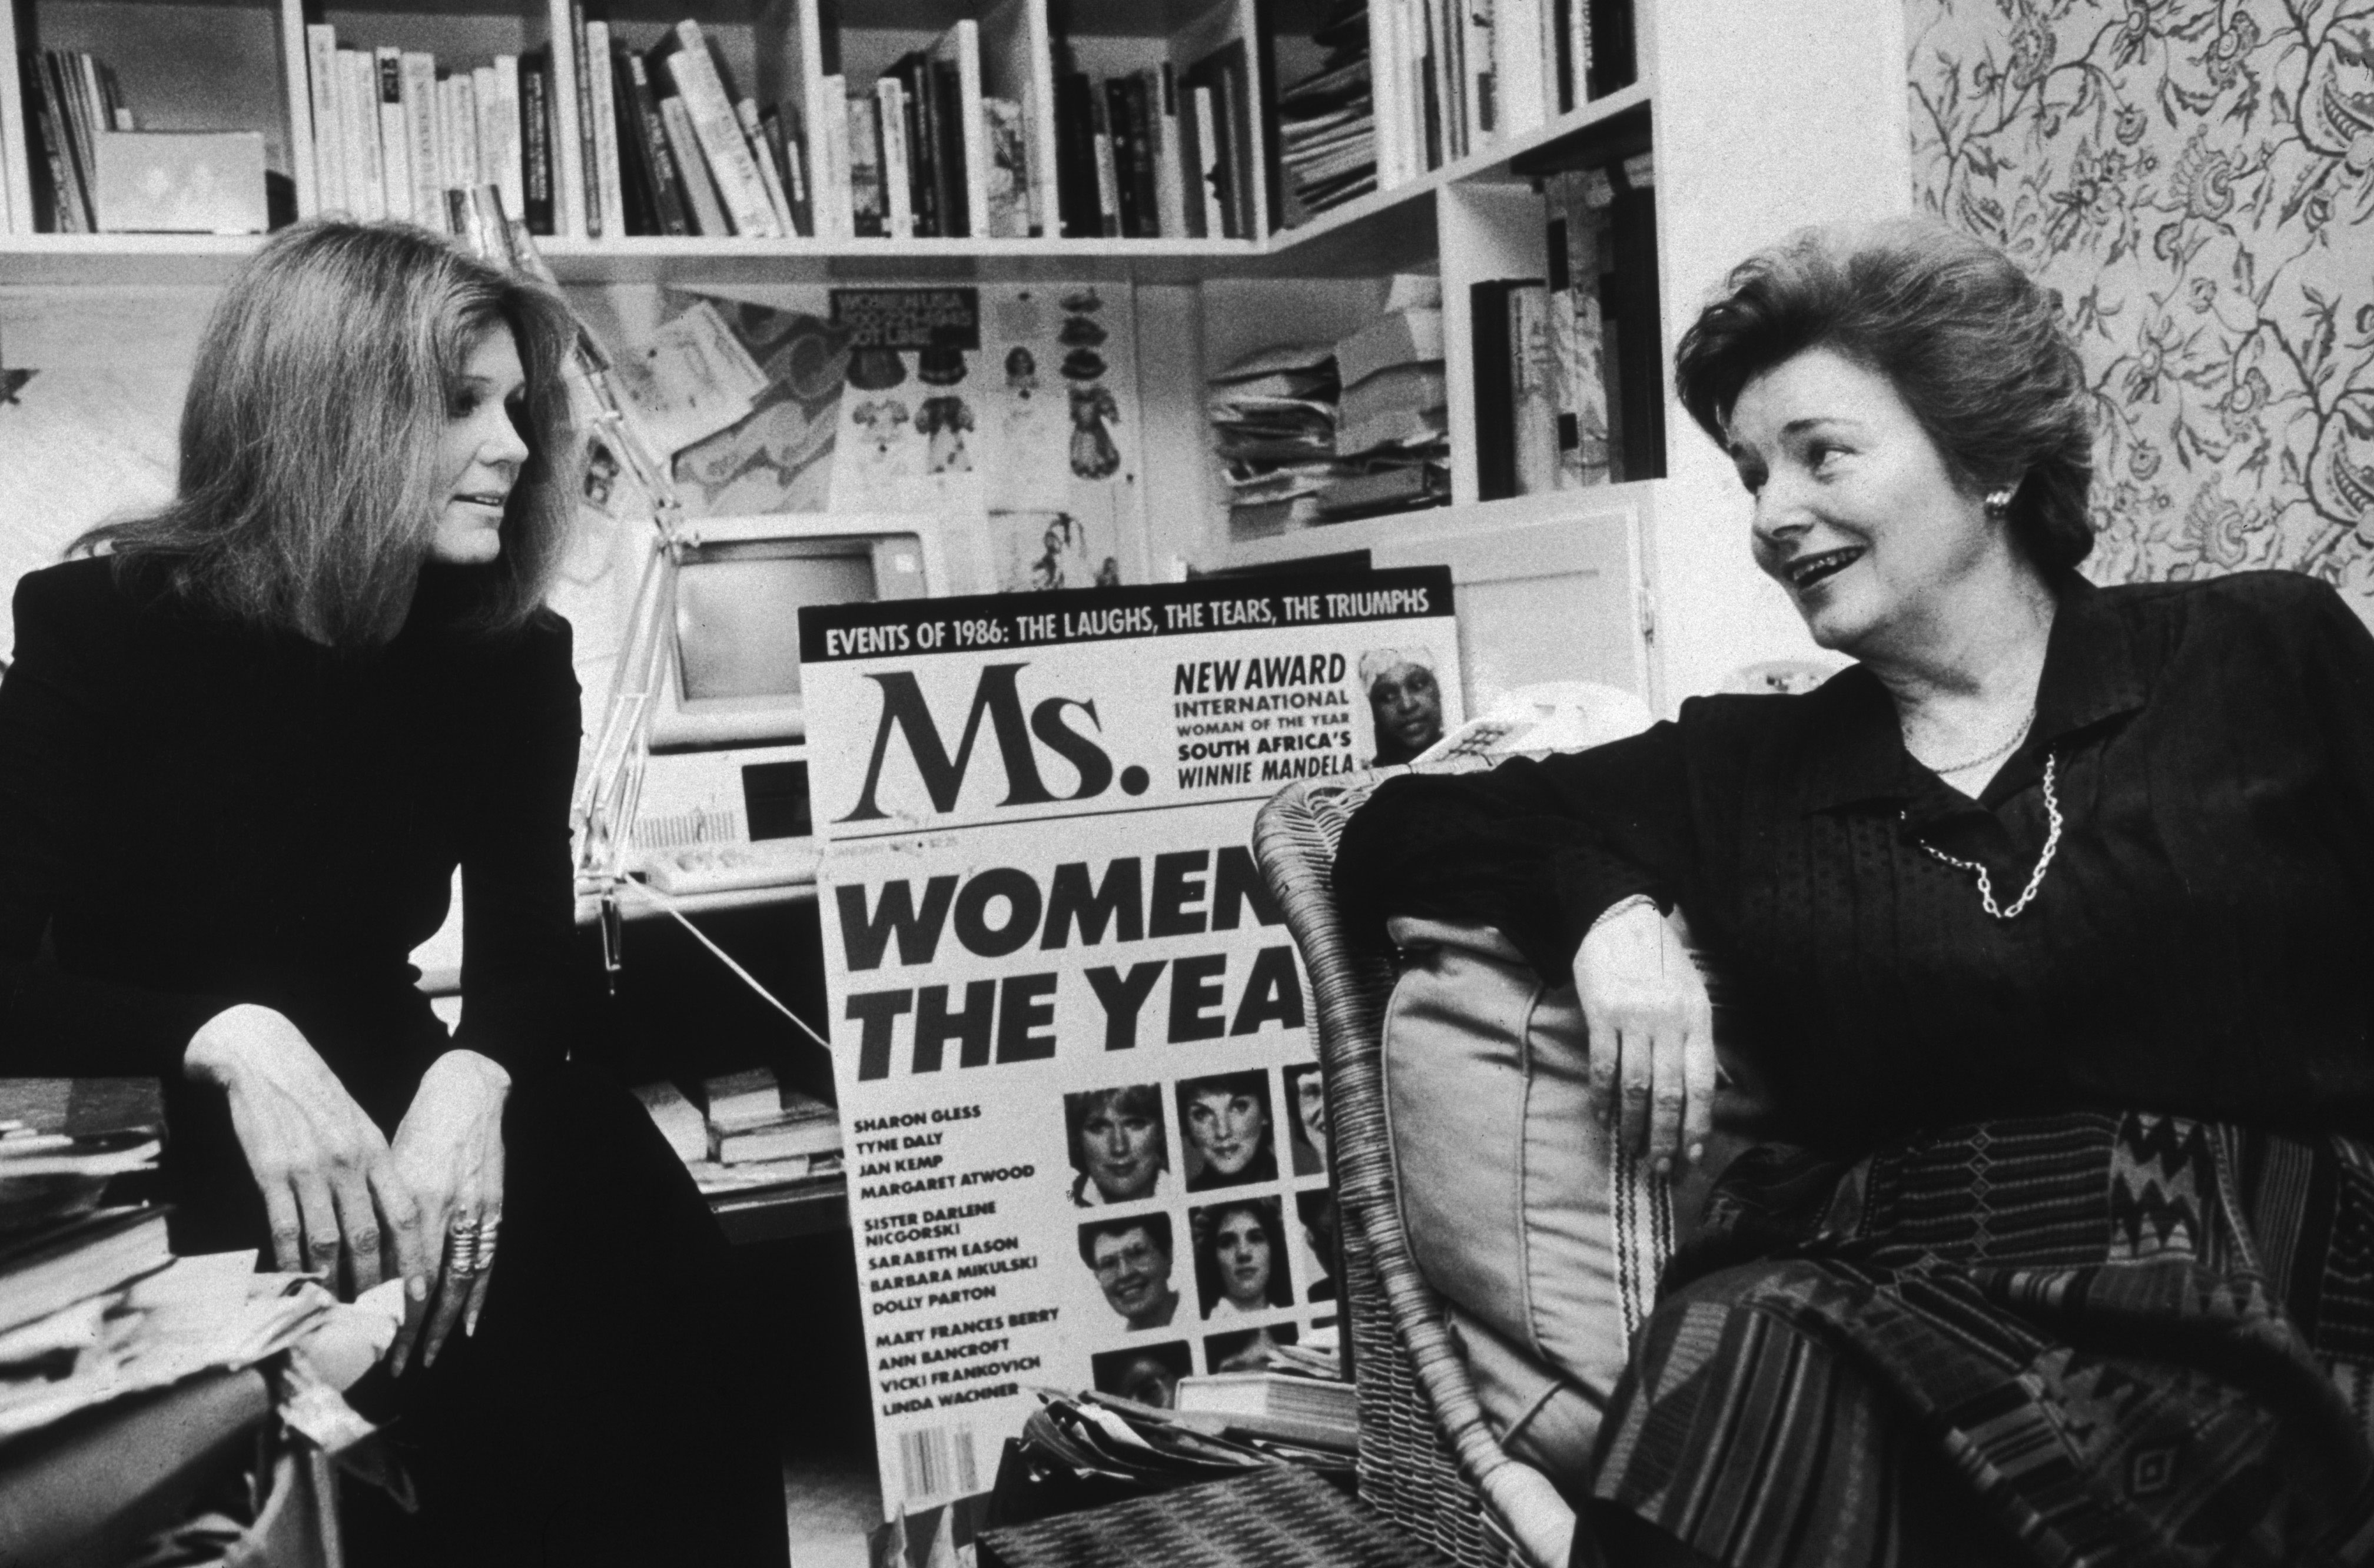 A black and white photo of Gloria Steinem sitting with another woman in an office space with a large display of a Ms. magazine cover of the Women of the Year issue.